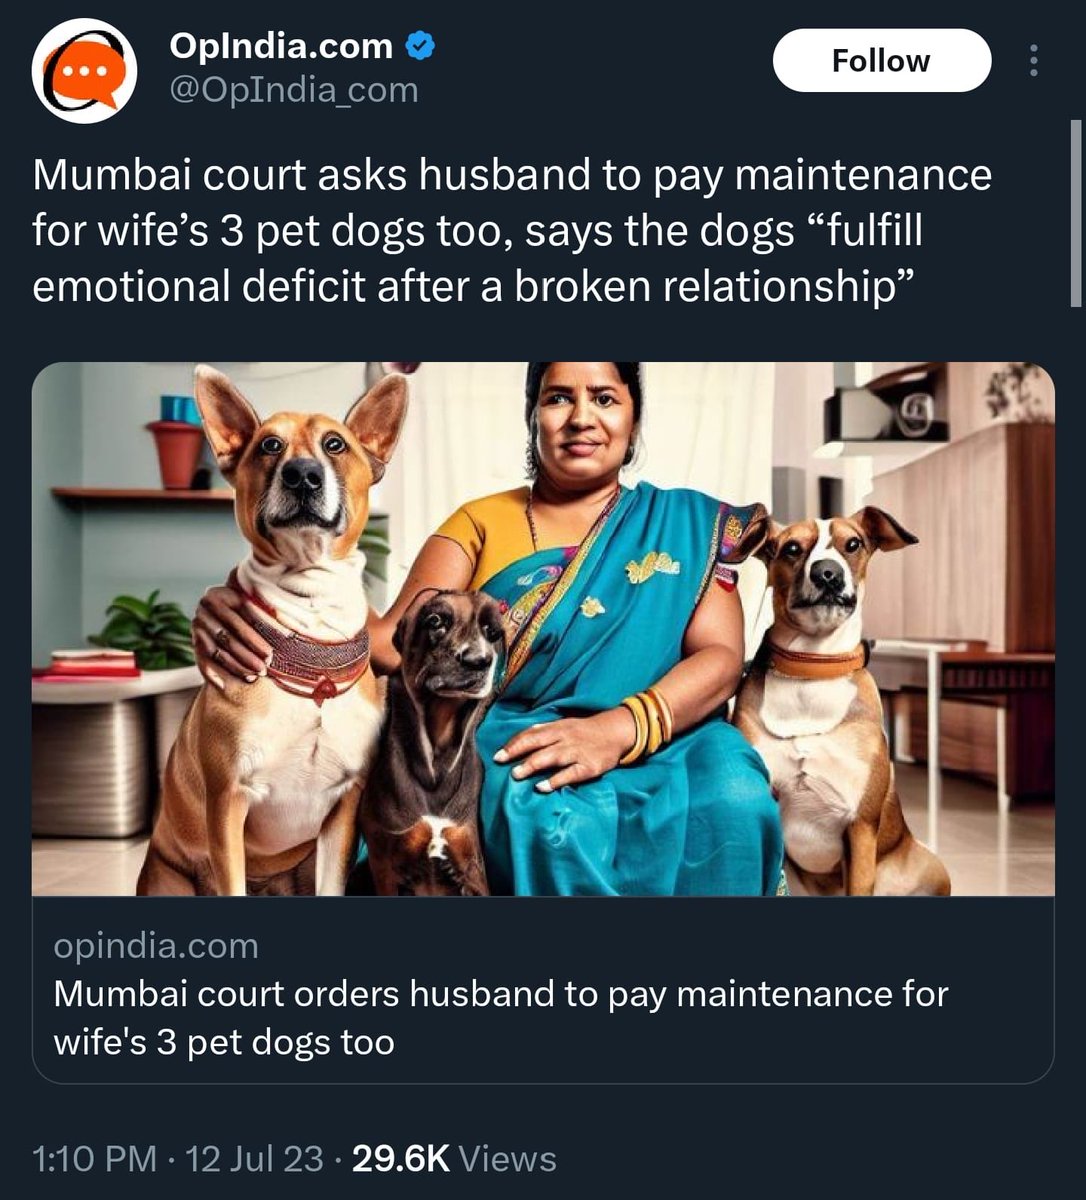 Triple Doggy style against men! Indian laws 🇮🇳